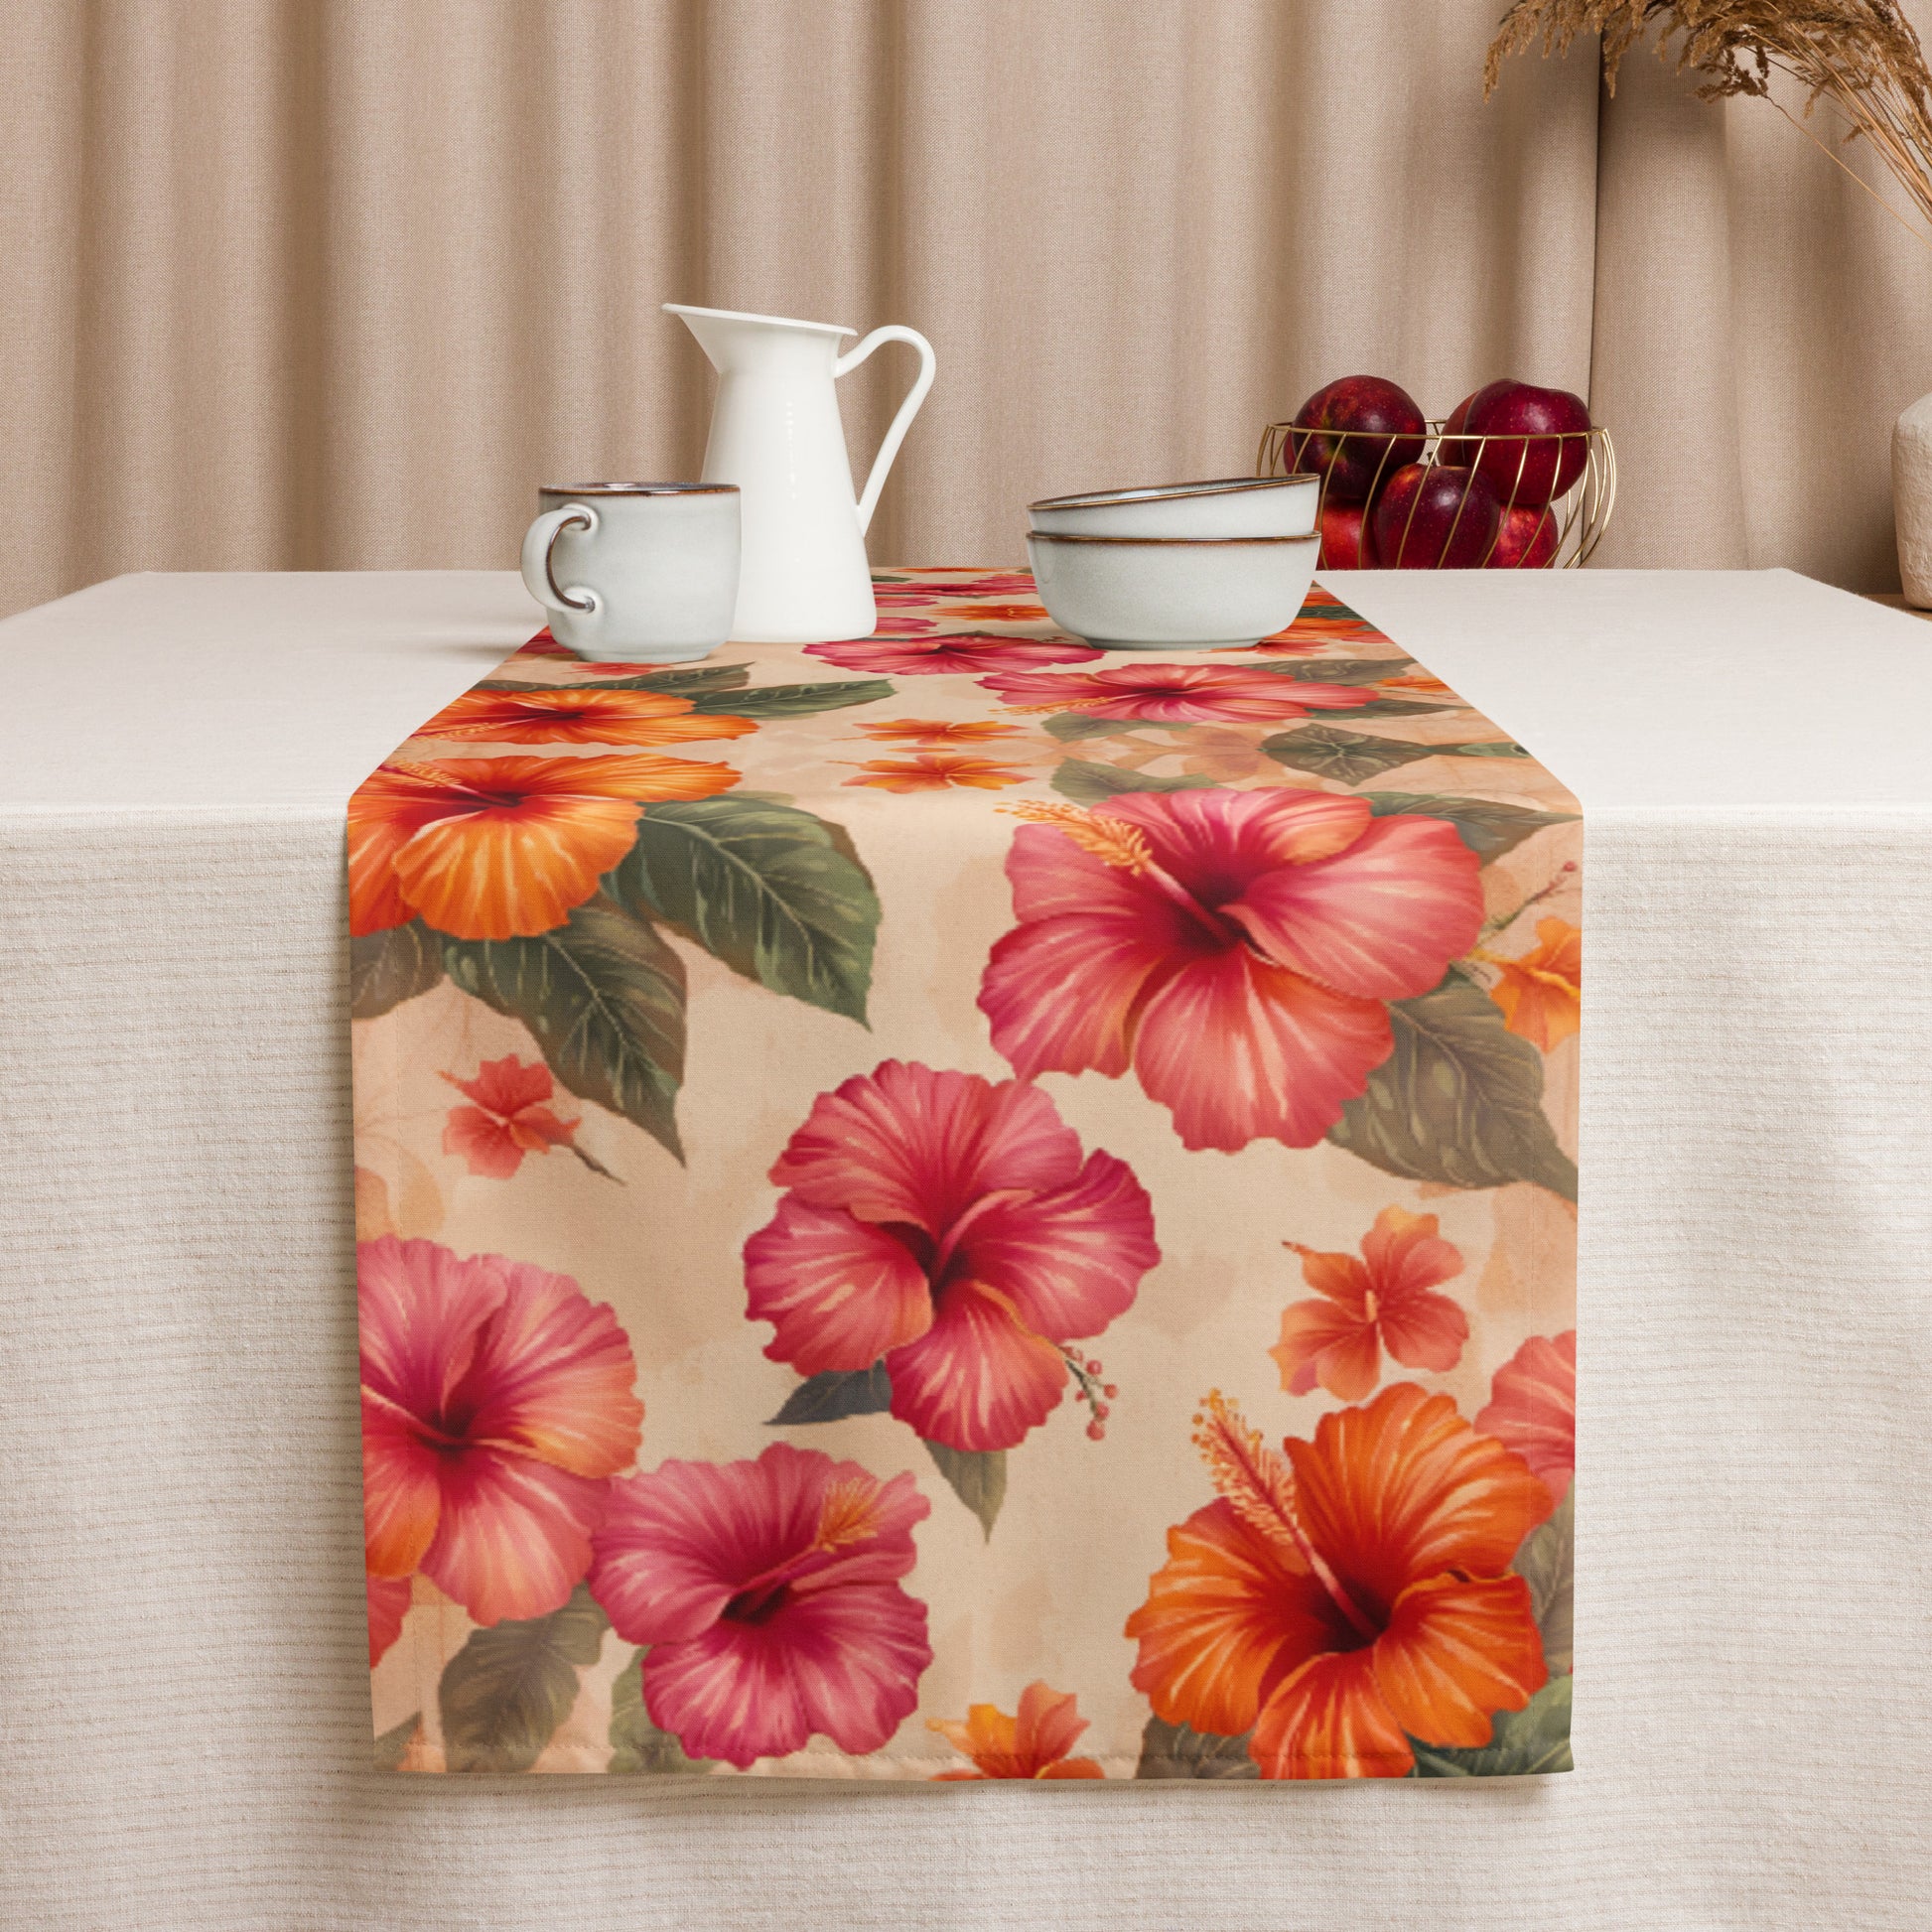 Pink and Orange Hibiscus Flowers Print Table Runner with coffee cups